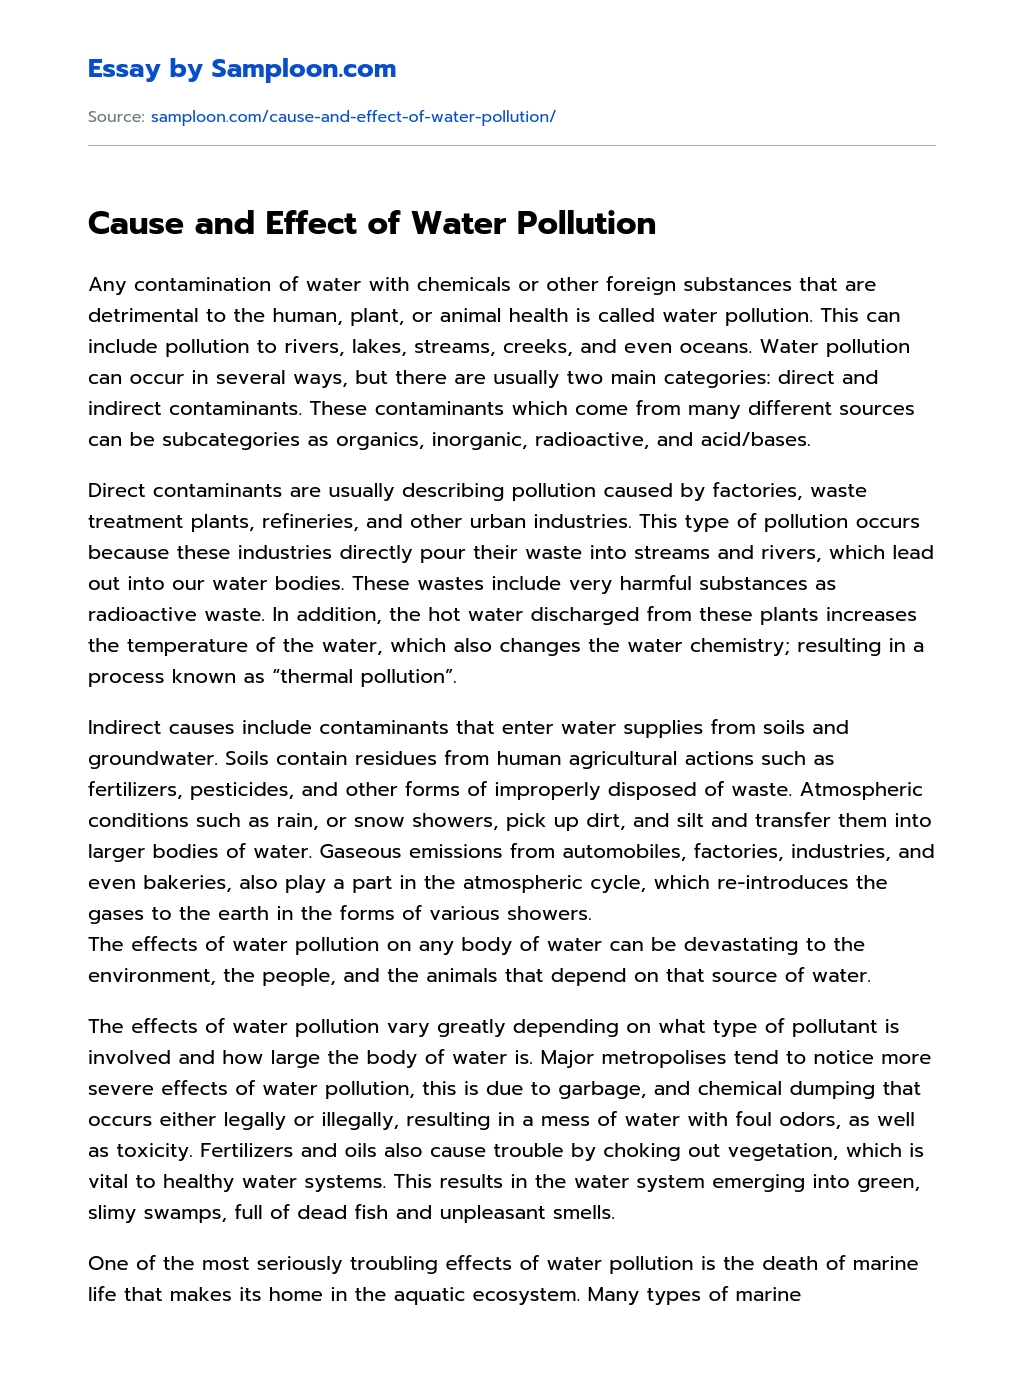 Cause and Effect of Water Pollution essay